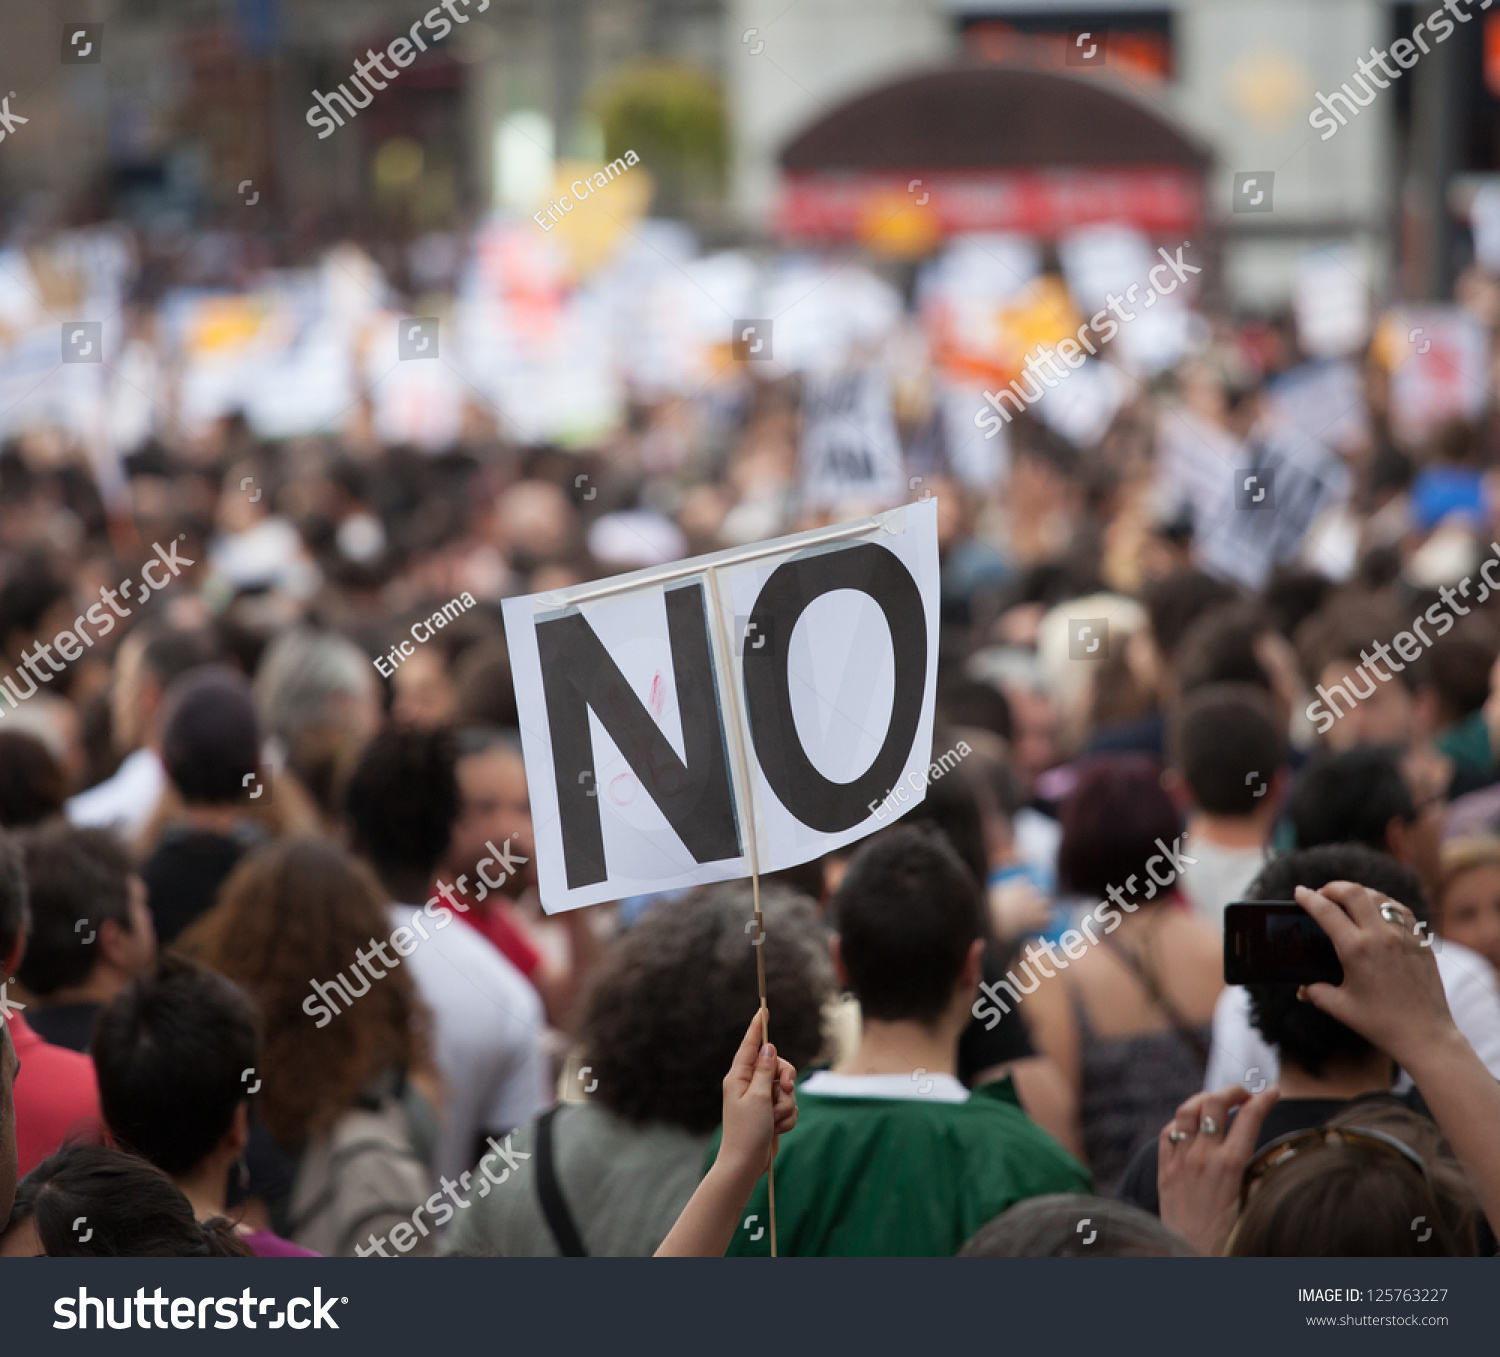 A general image of unidentified people protesting. #125763227